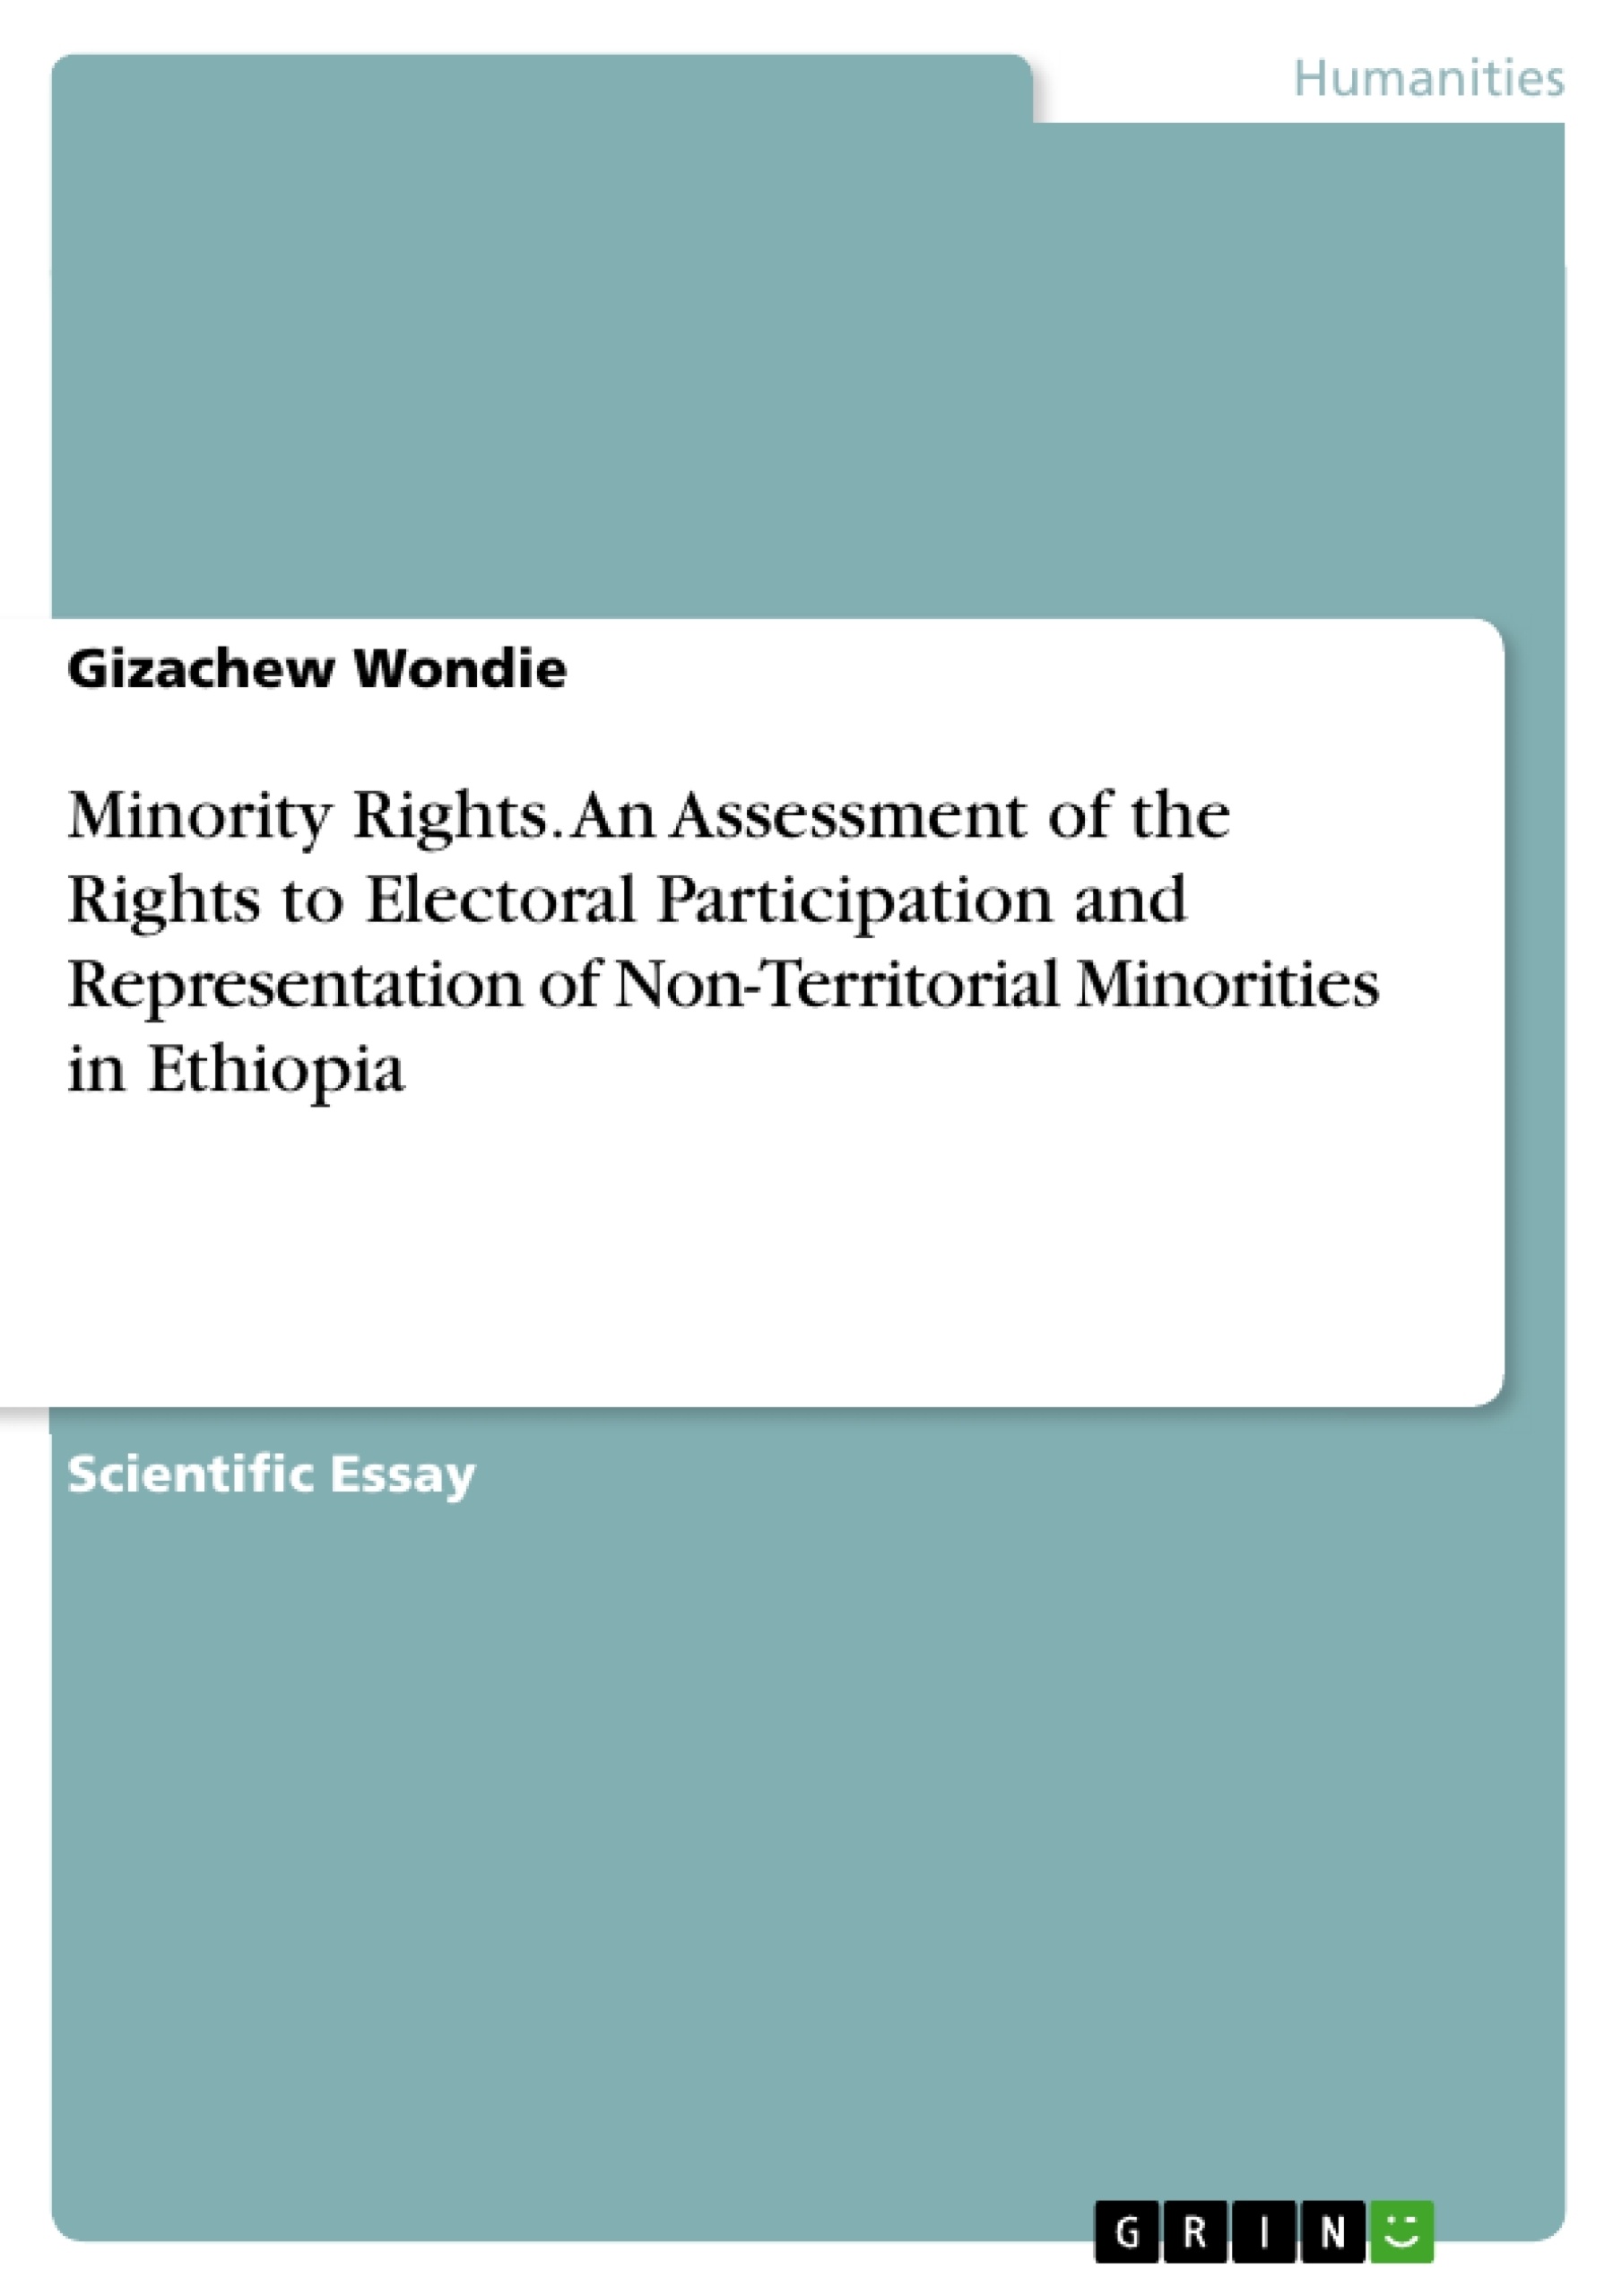 Título: Minority Rights. An Assessment of the Rights to Electoral Participation and Representation of Non-Territorial Minorities in Ethiopia